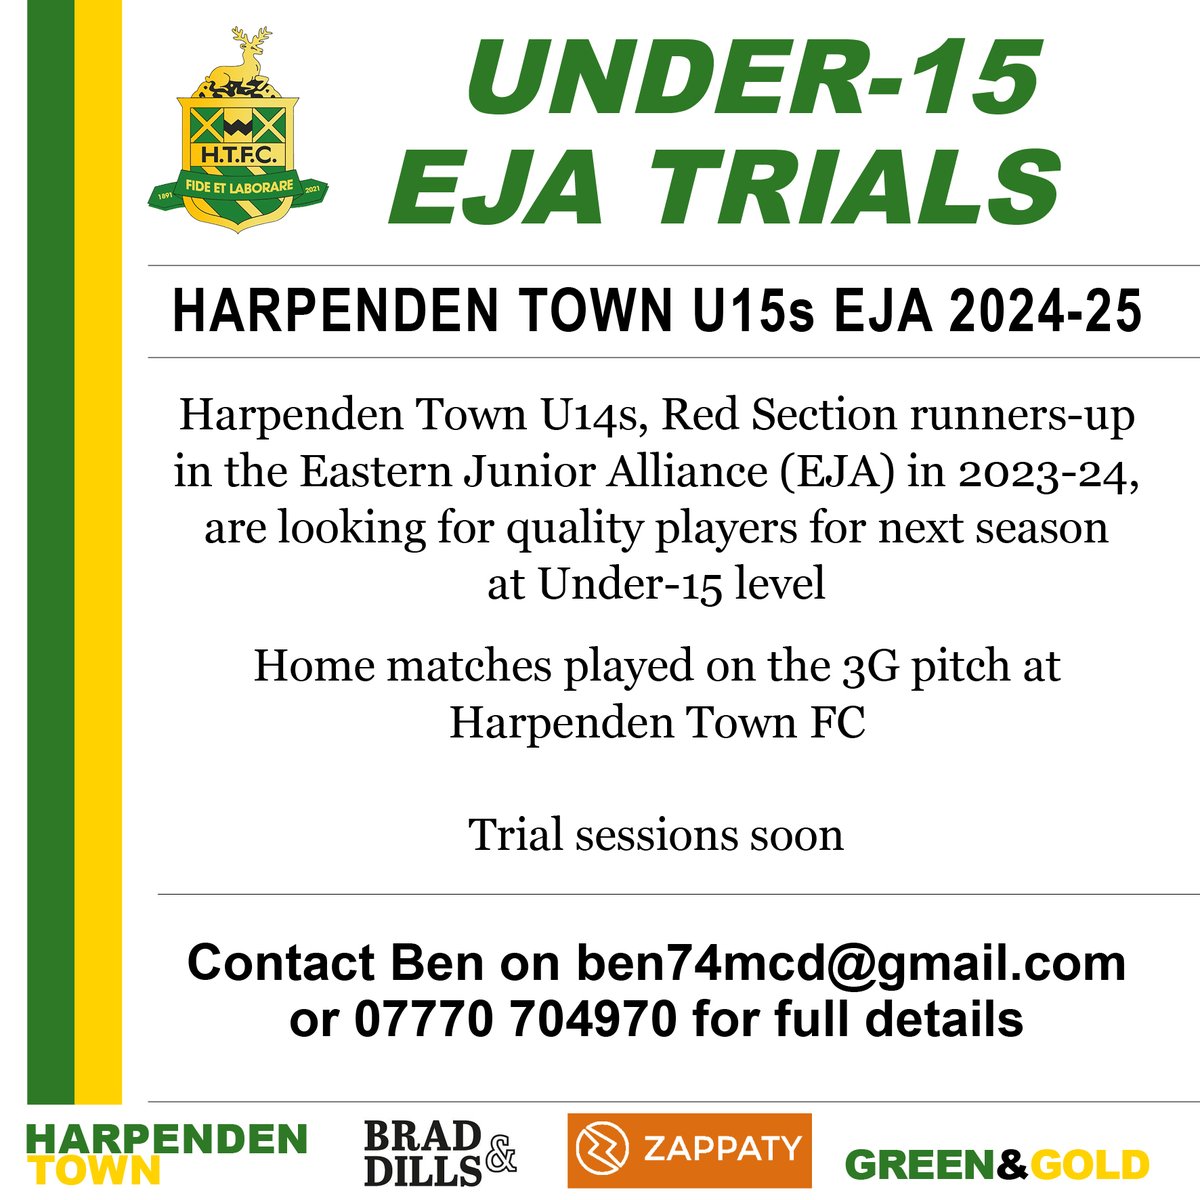 ⚽️ UNDER-15 EJA TRIALS

Harpenden Town U14s – Red Section runners-up in the Eastern Junior Alliance (EJA) – are holding trials for players as they step up to Under-15 level next season.

The trials will be held soon and to express an interest, the contact details are 👇